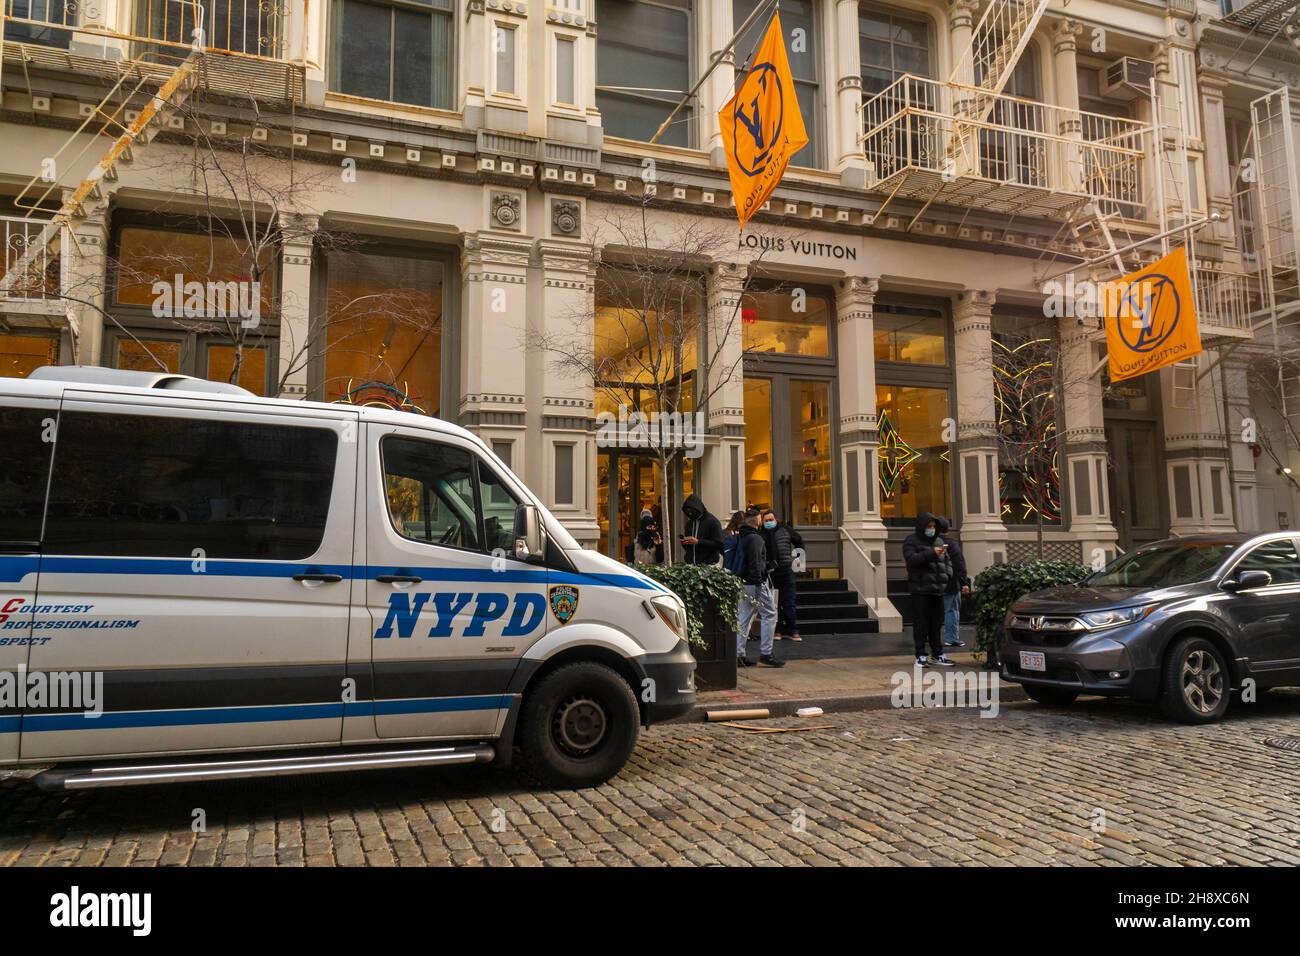 Police in front of the Louis Vuitton store in the Soho neighborhood of New York on Saturday, November 27, 2021 during the Black Friday weekend. The police presence was noticeable as the NYPD pro-actively prevented a smash and grab problem that effected San Francisco. (© Richard B. Levine) Stock Photo